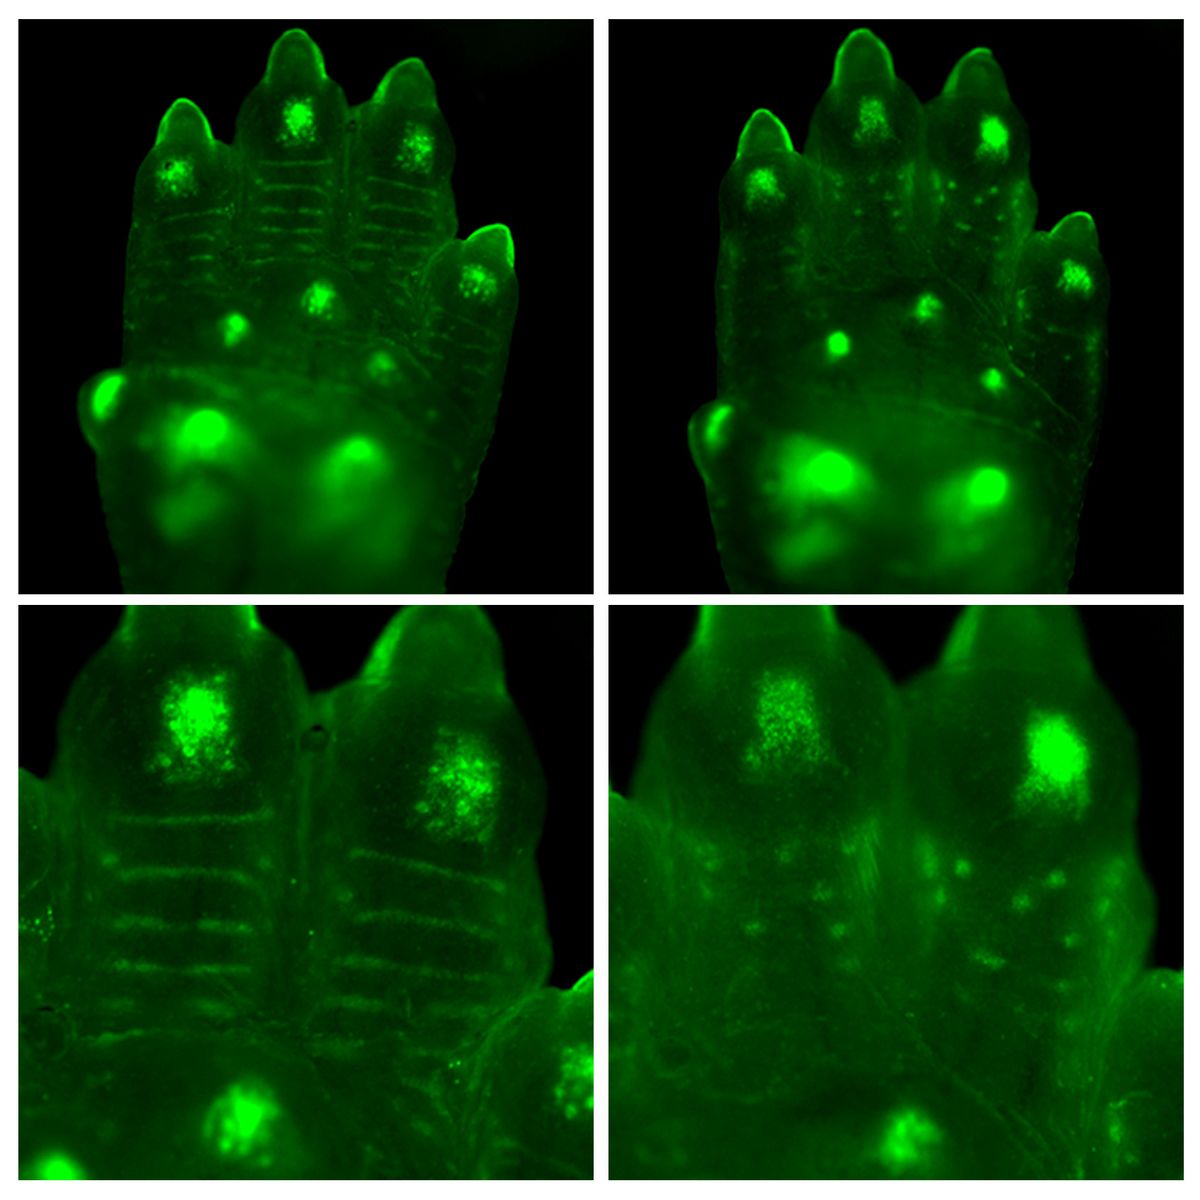 Fluorescent images showing normal mouse paws with ridges and the paws of EDAR mutated mice with spots instead